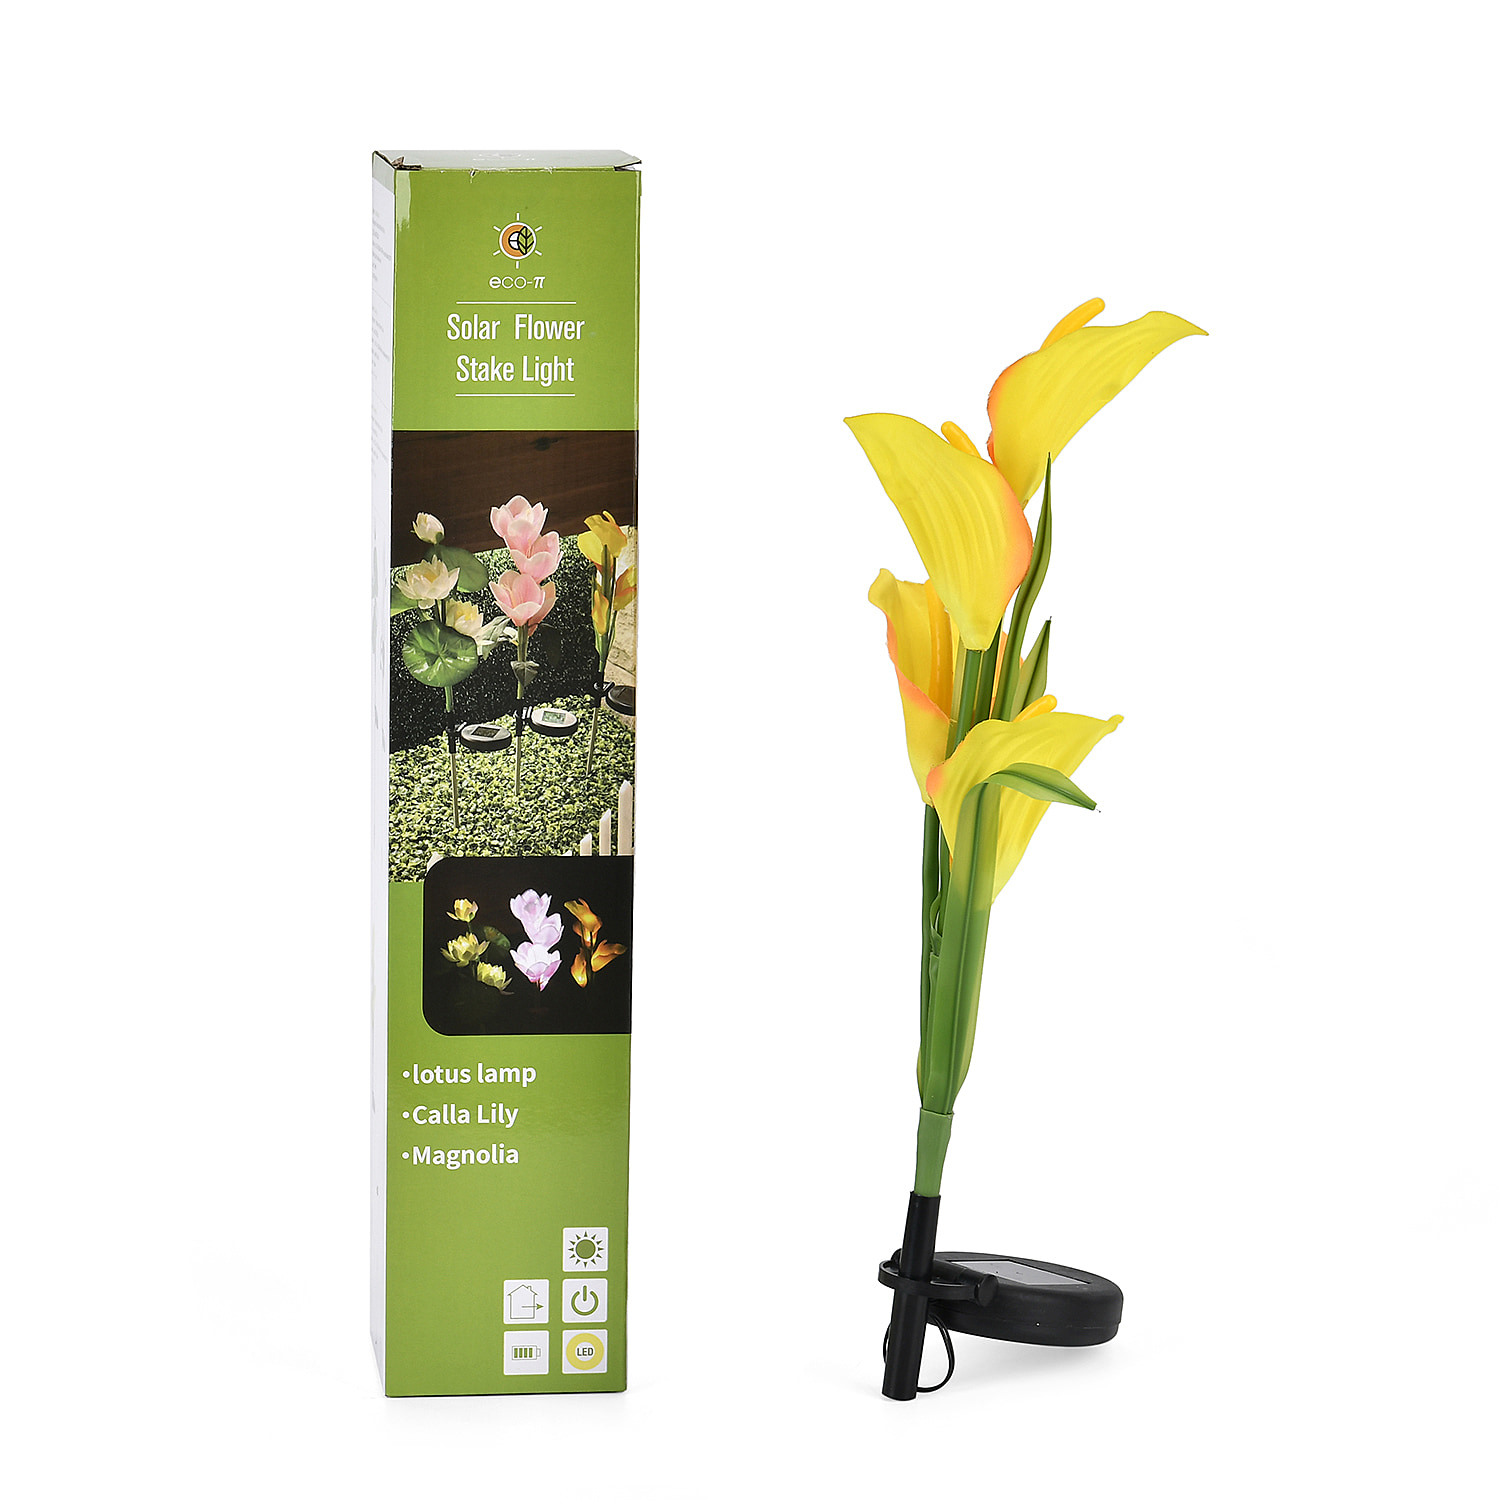 Calla Lily Solar Lamp With 4 LEDs - Yellow & Green